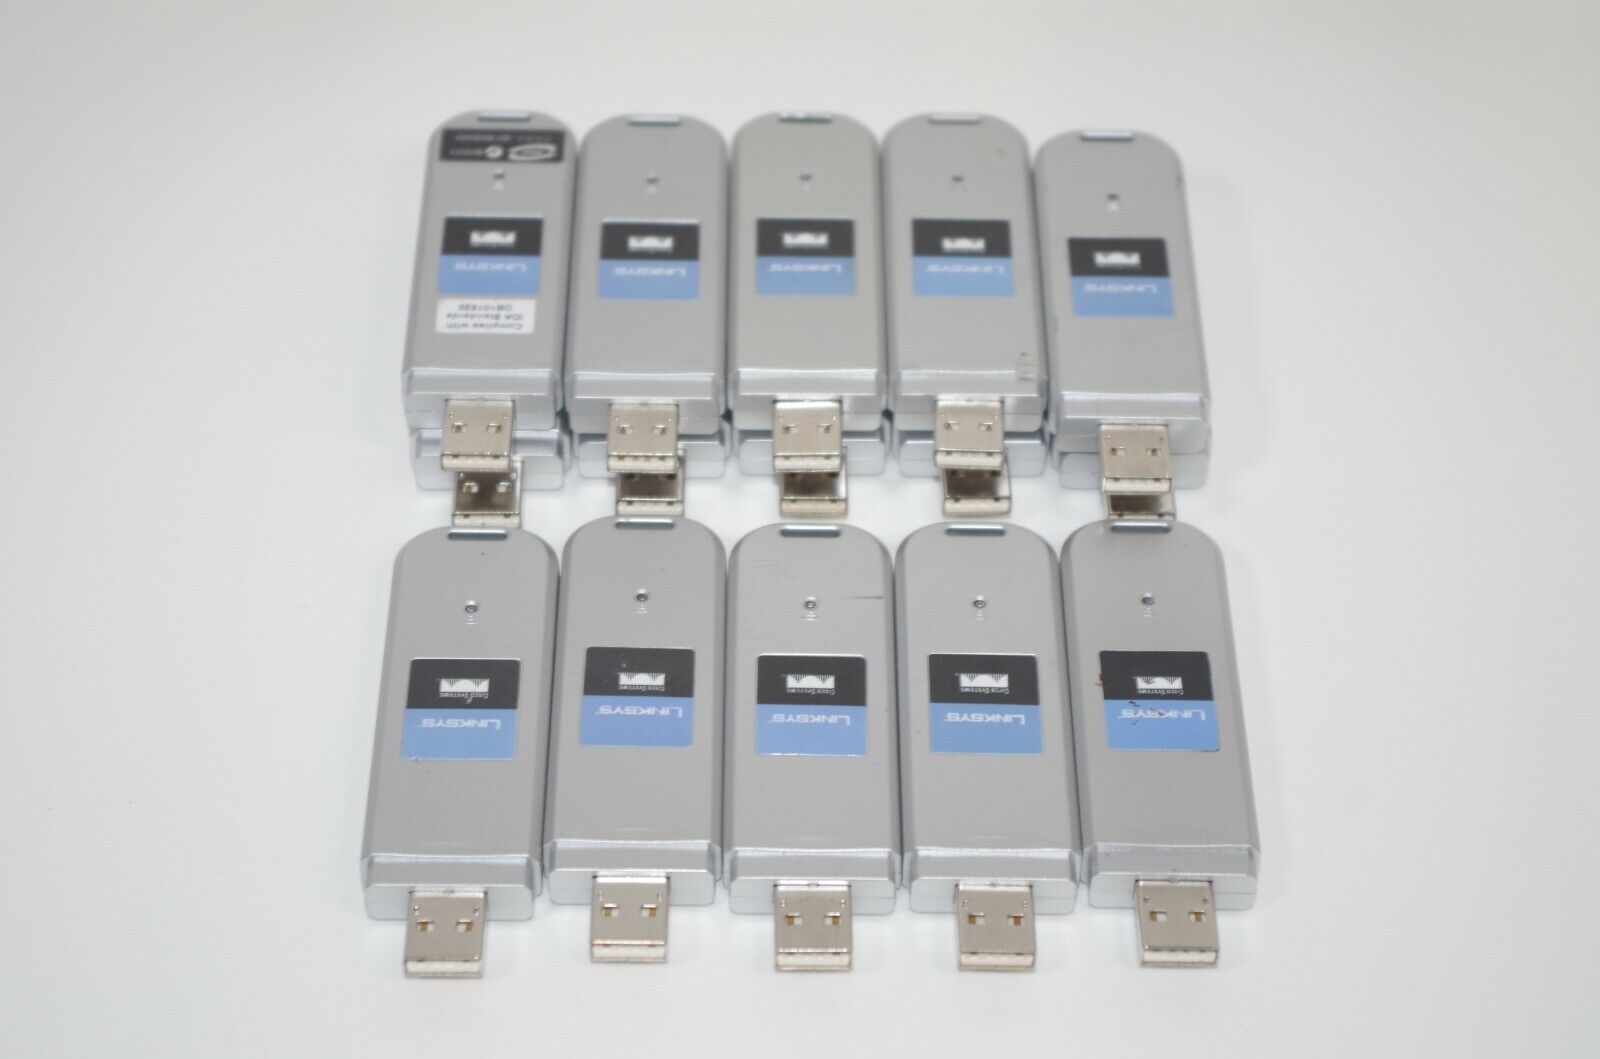 Lot of 15 Linksys/Cisco Systems WUSB54GC Compact Wireless-G USB Adapters